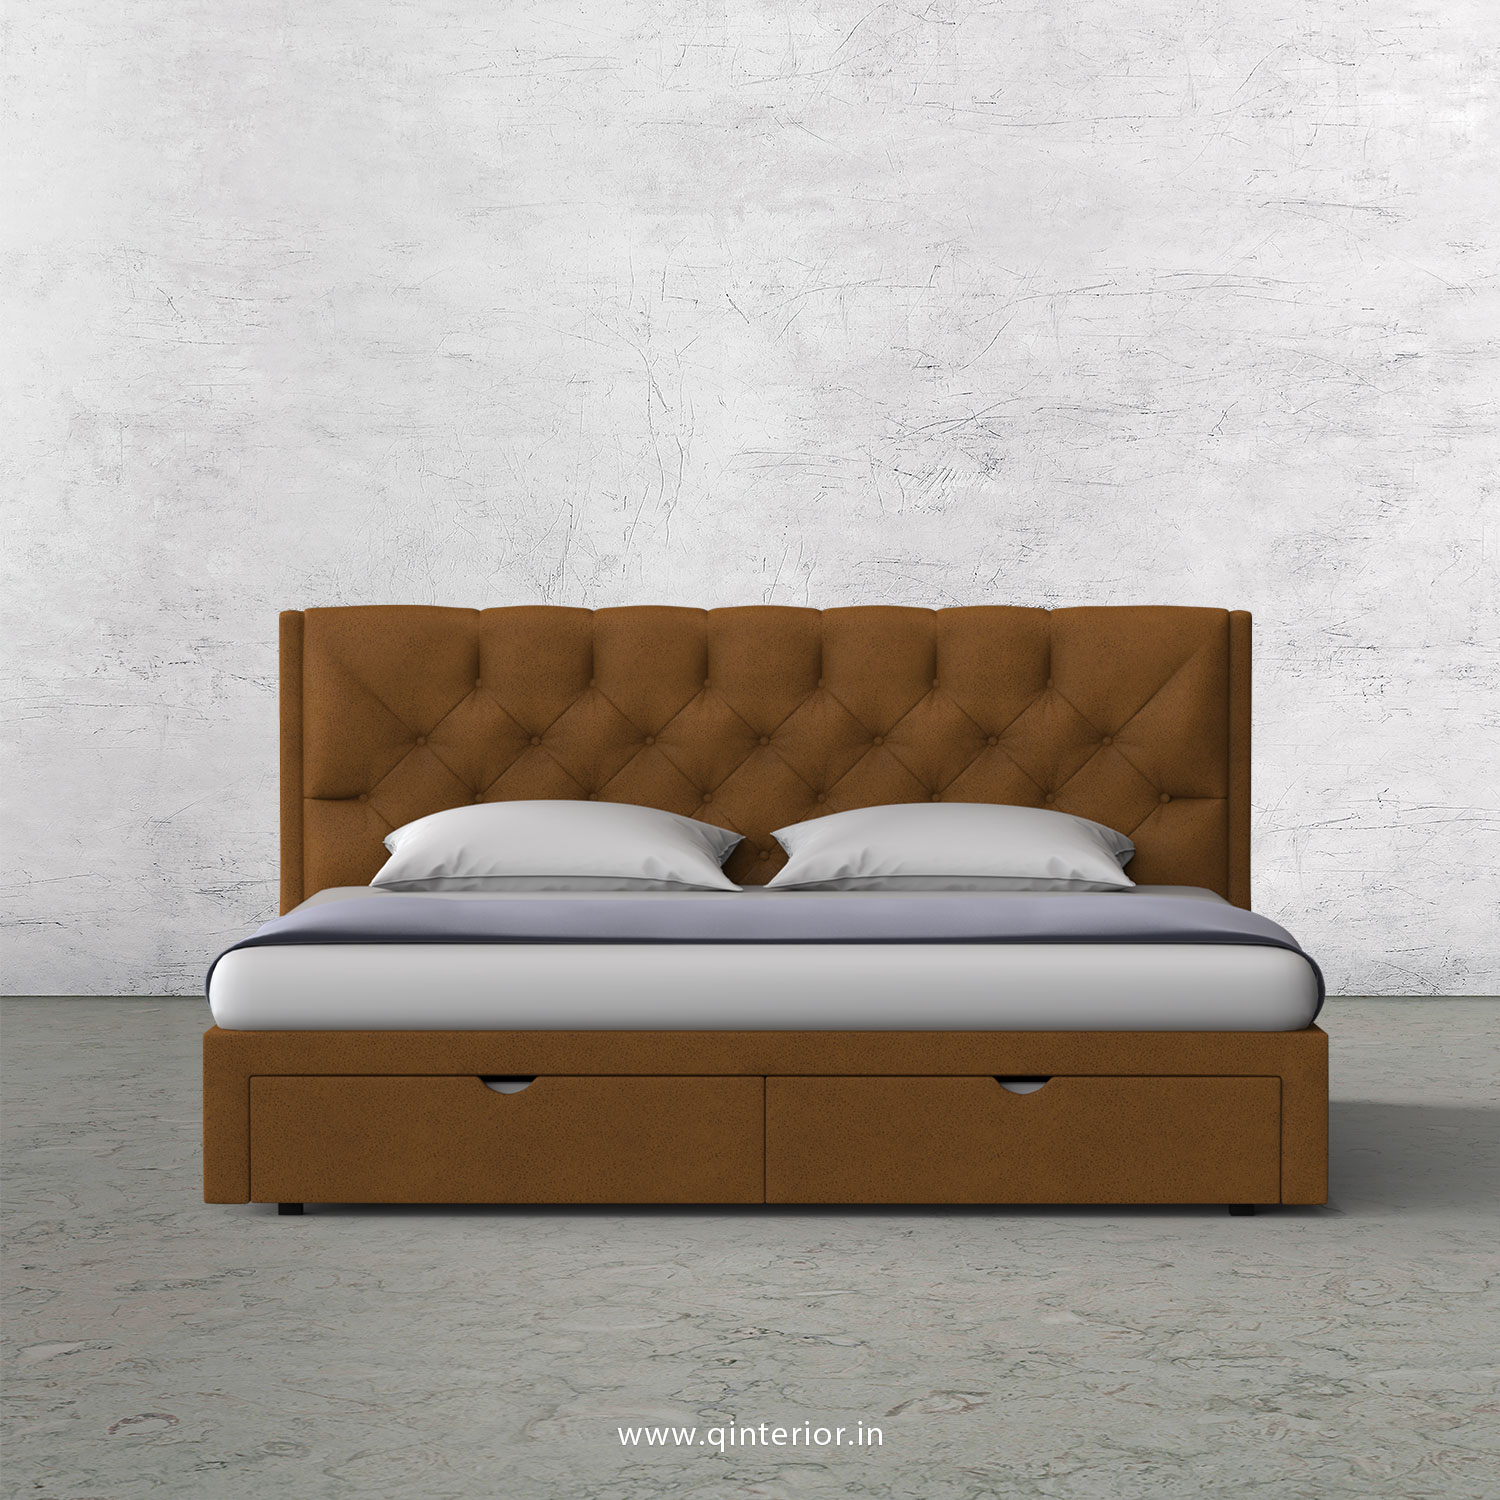 Scorpius Queen Storage Bed in Fab Leather Fabric - QBD001 FL14